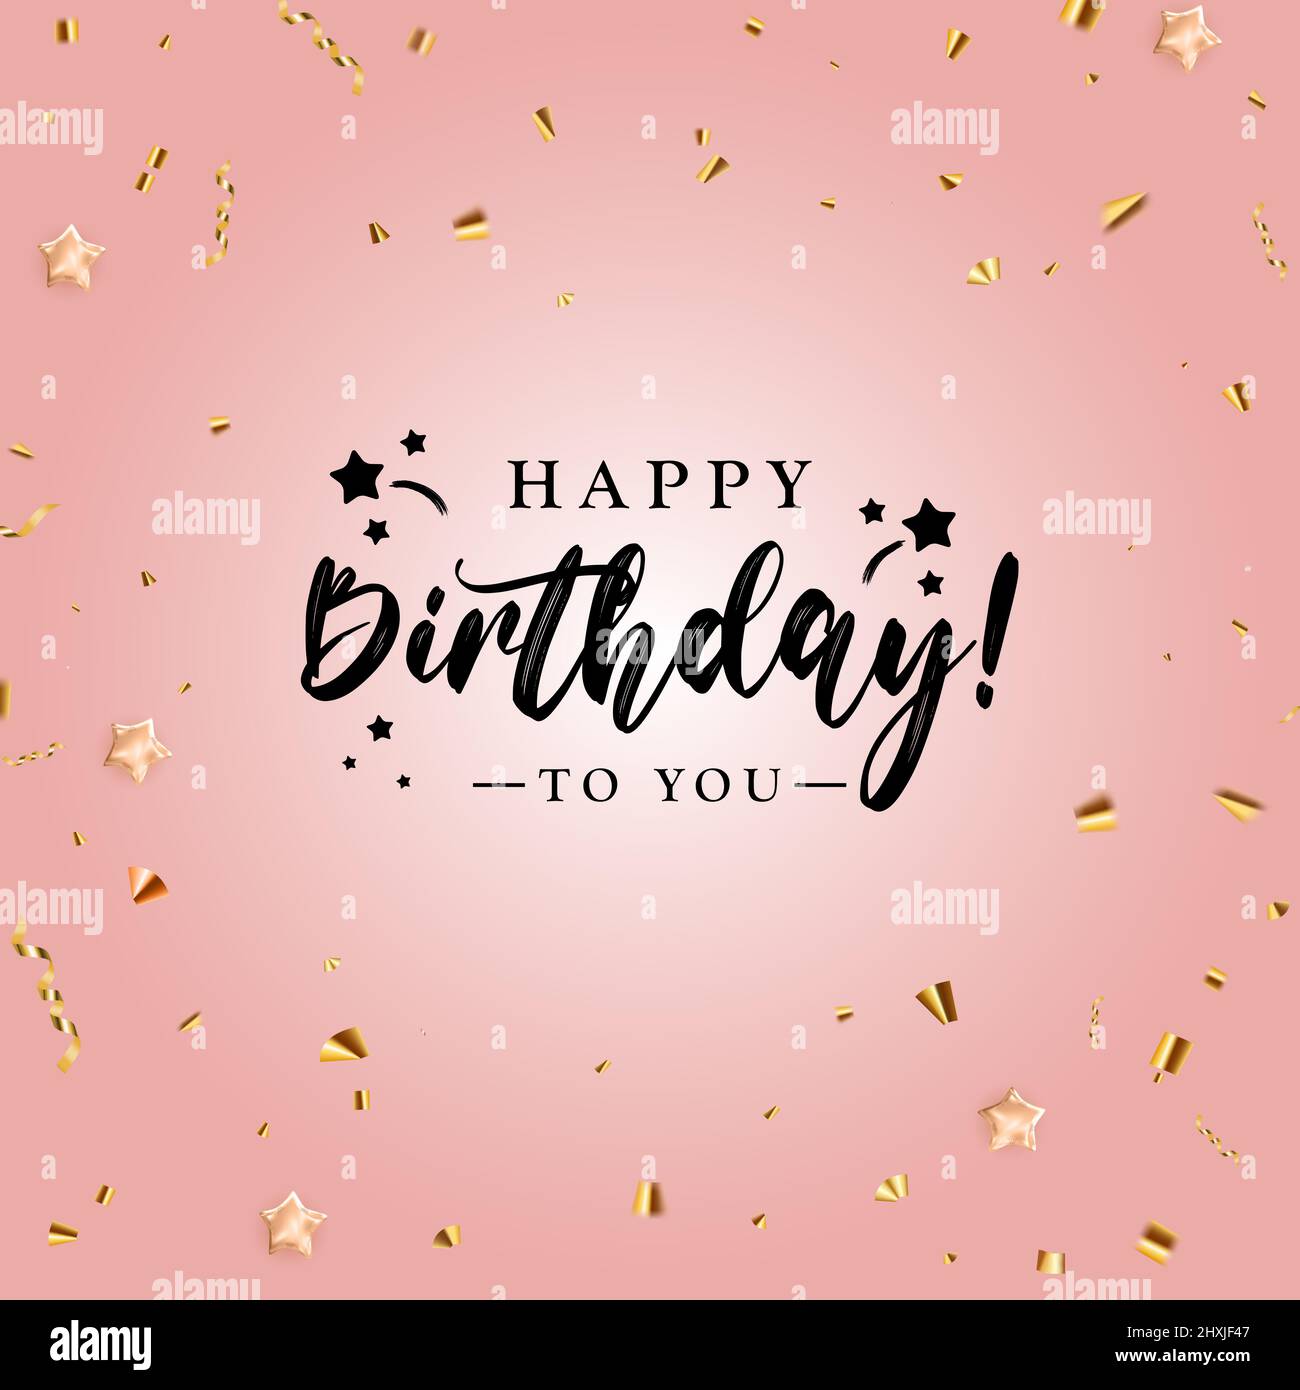 Happy Birthday party holiday background with golden confetti ...